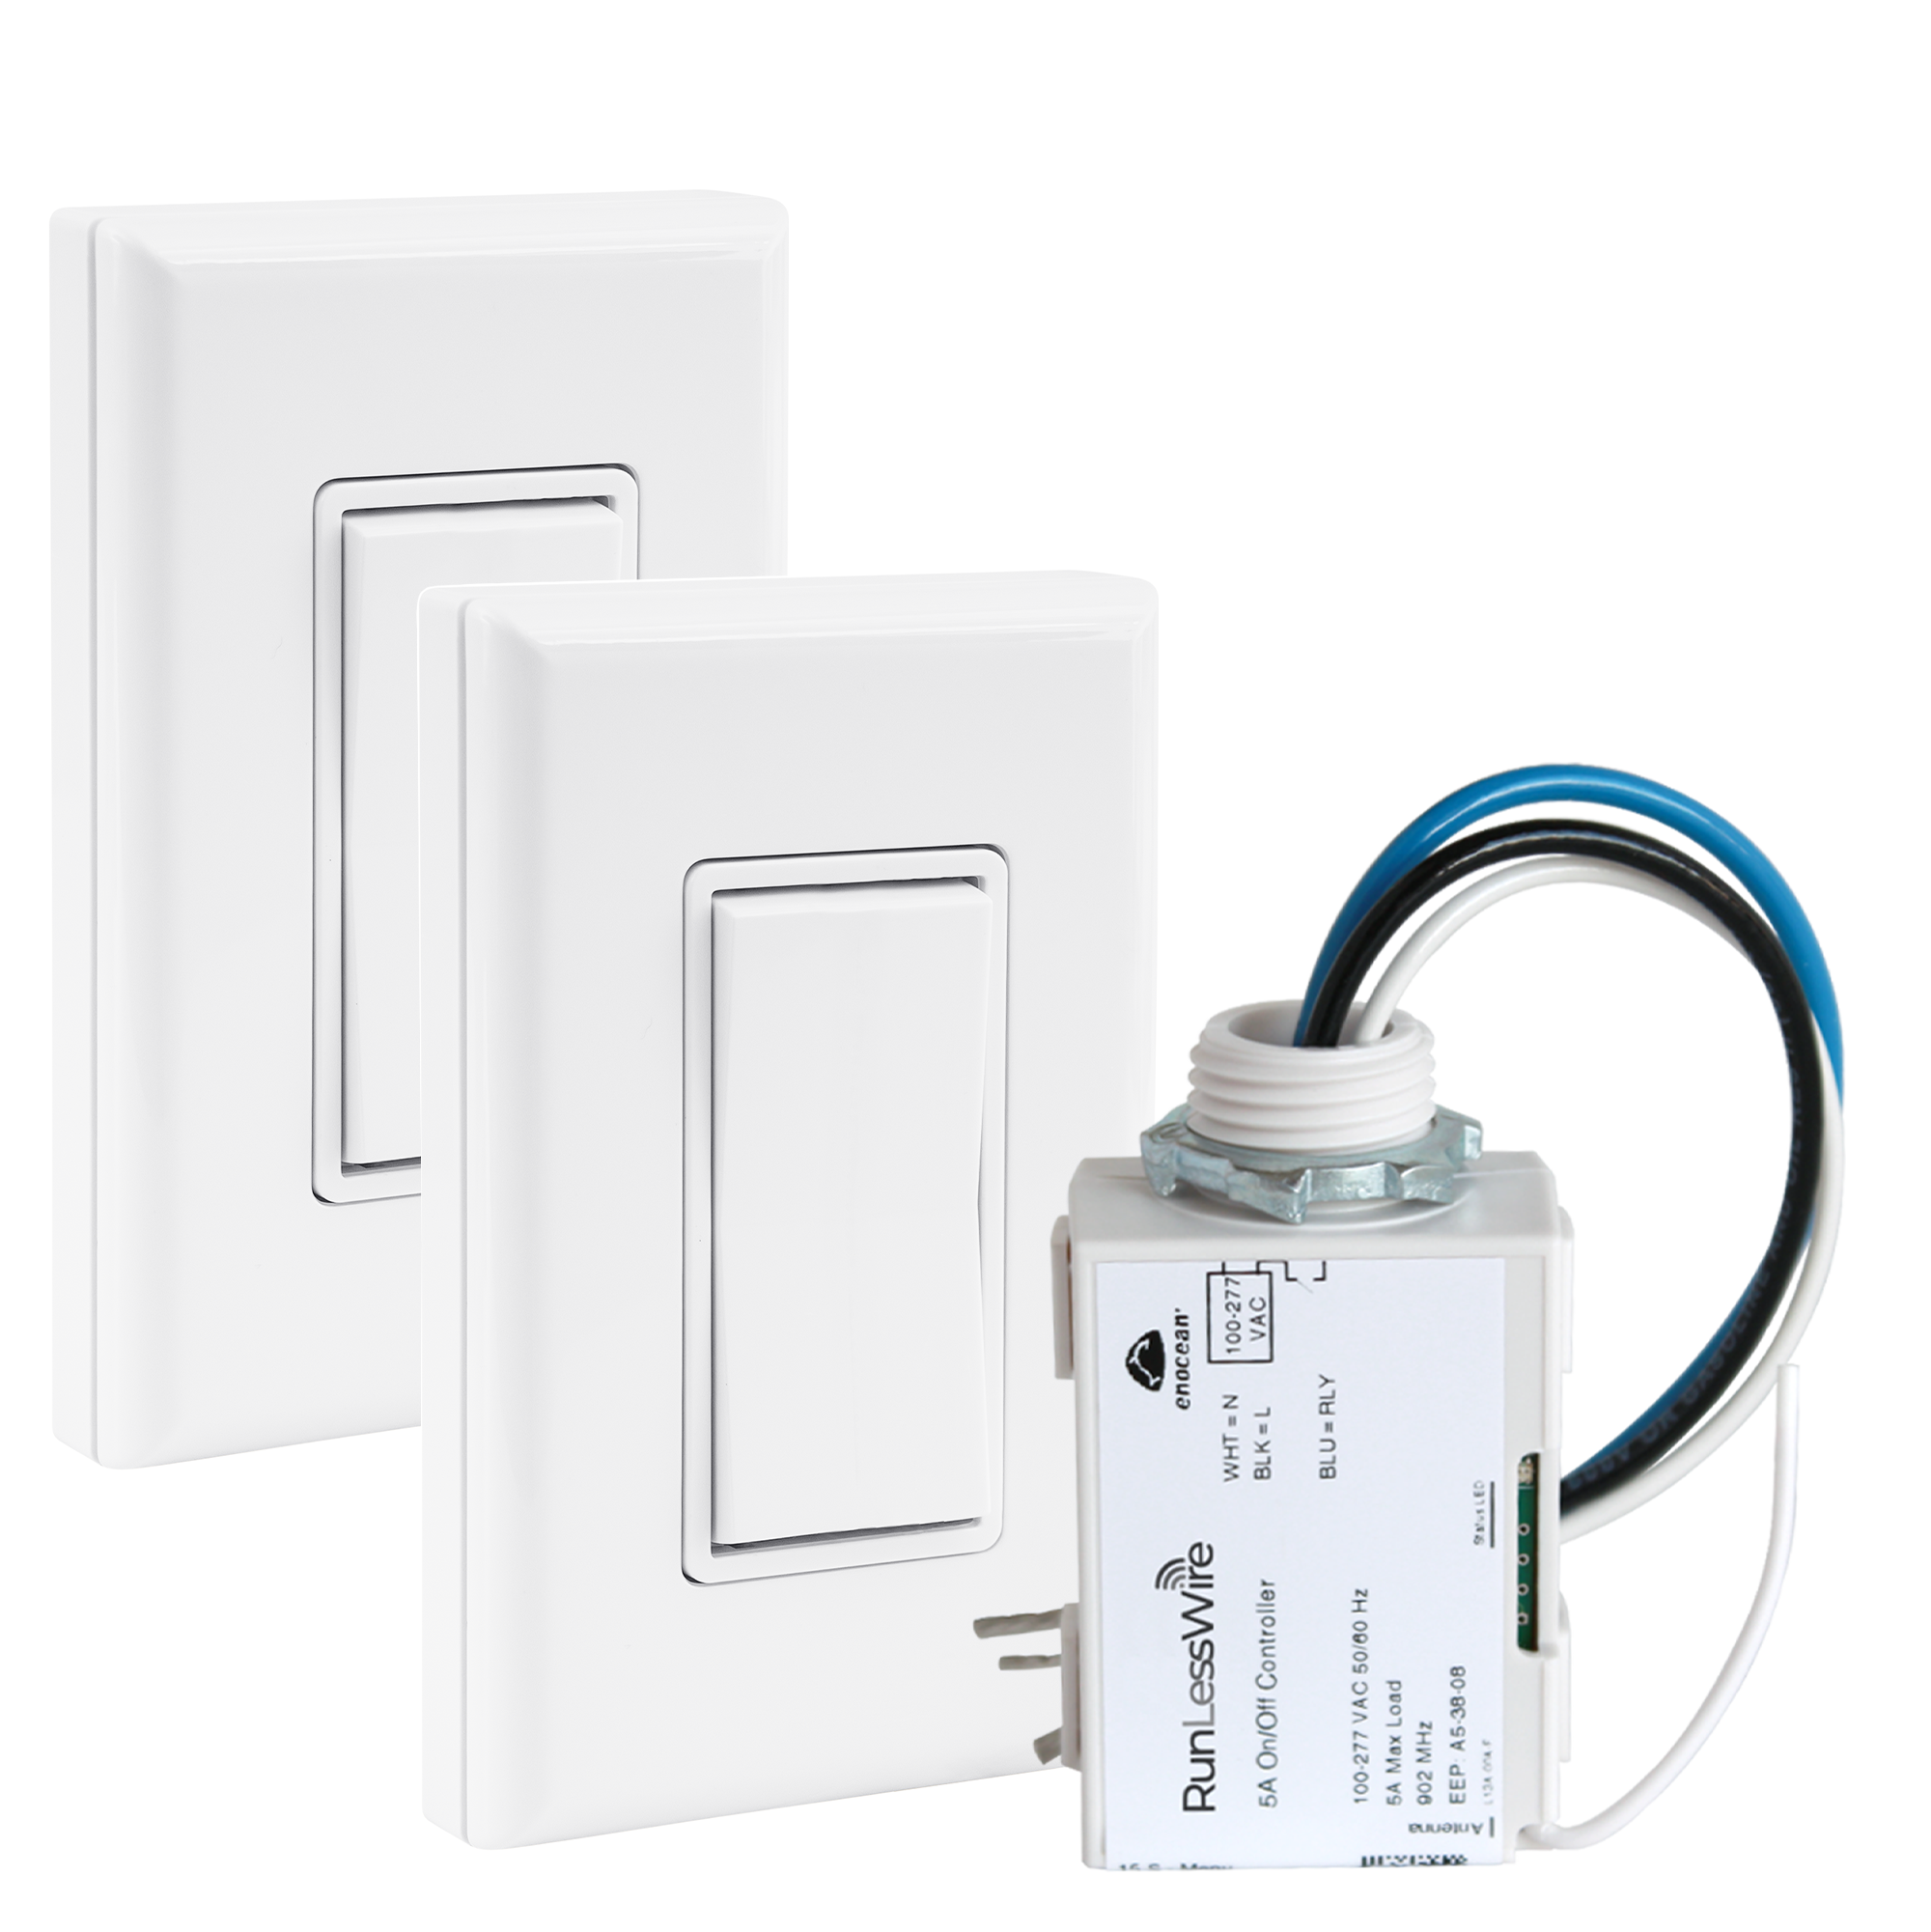 nægte ikke noget Begrænset 3-Way Wireless Fan & Light Switch Kit – 2 Controllers, 2 Switches